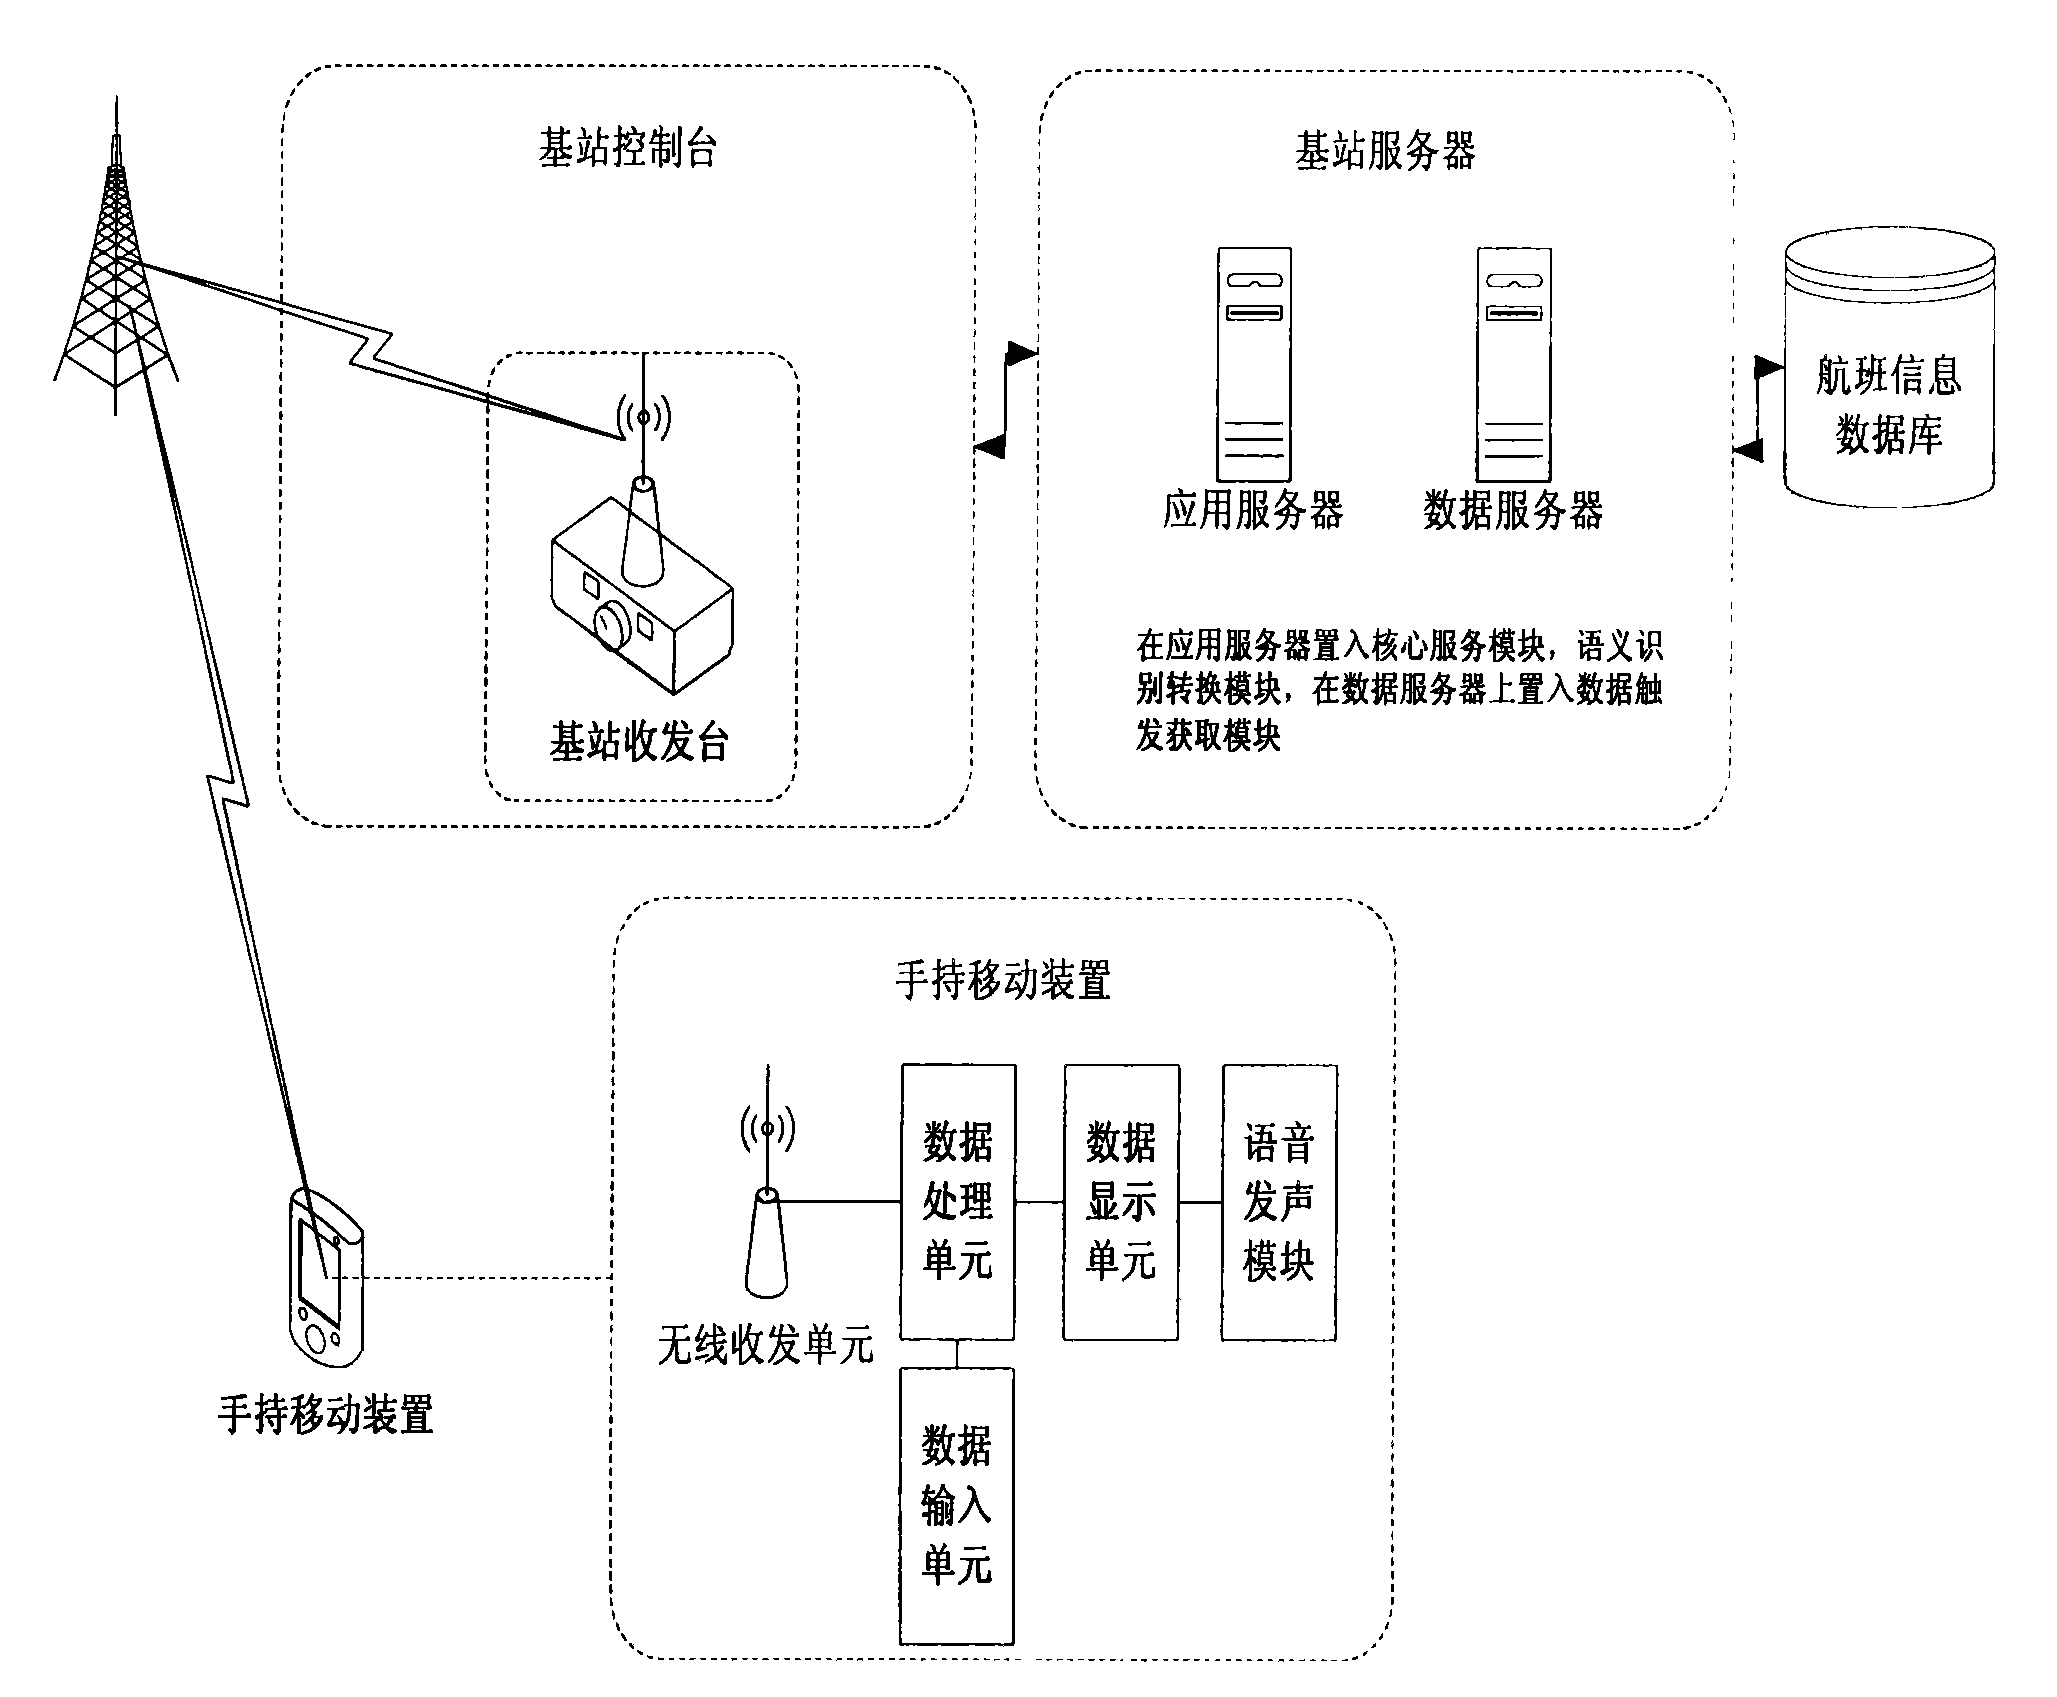 Flight information instant informing device and processing method thereof